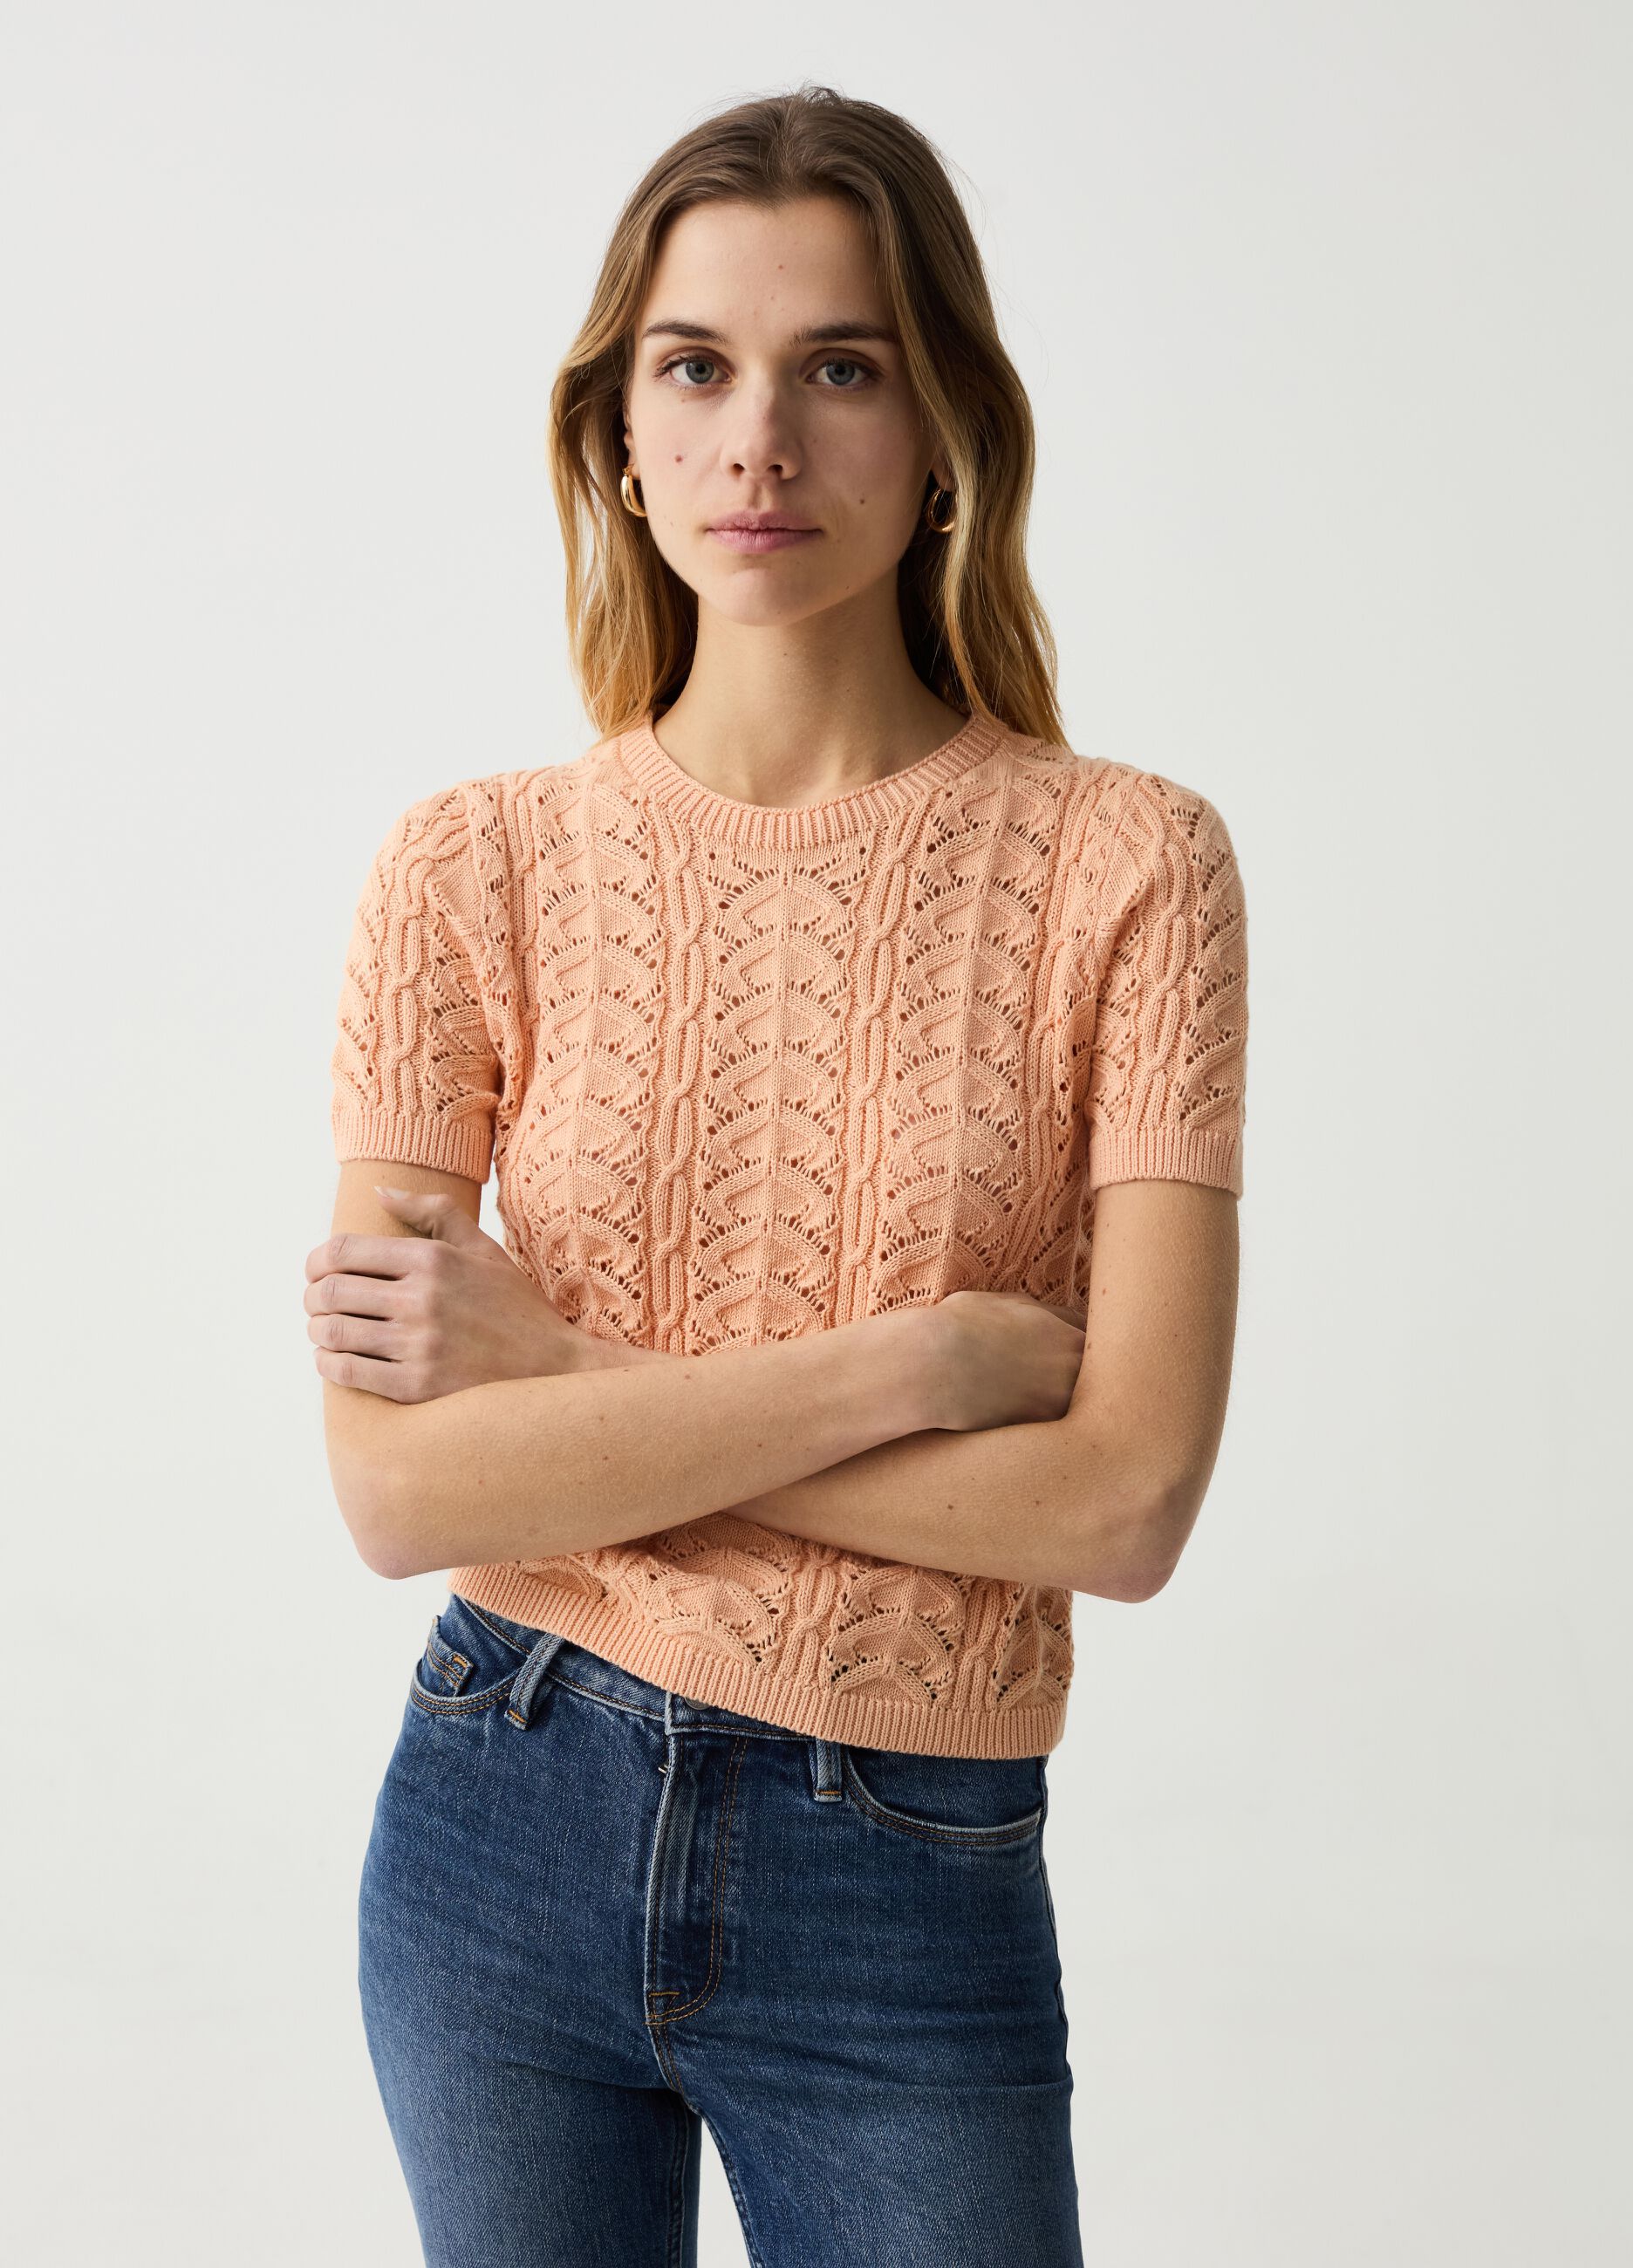 Crochet top with short sleeves